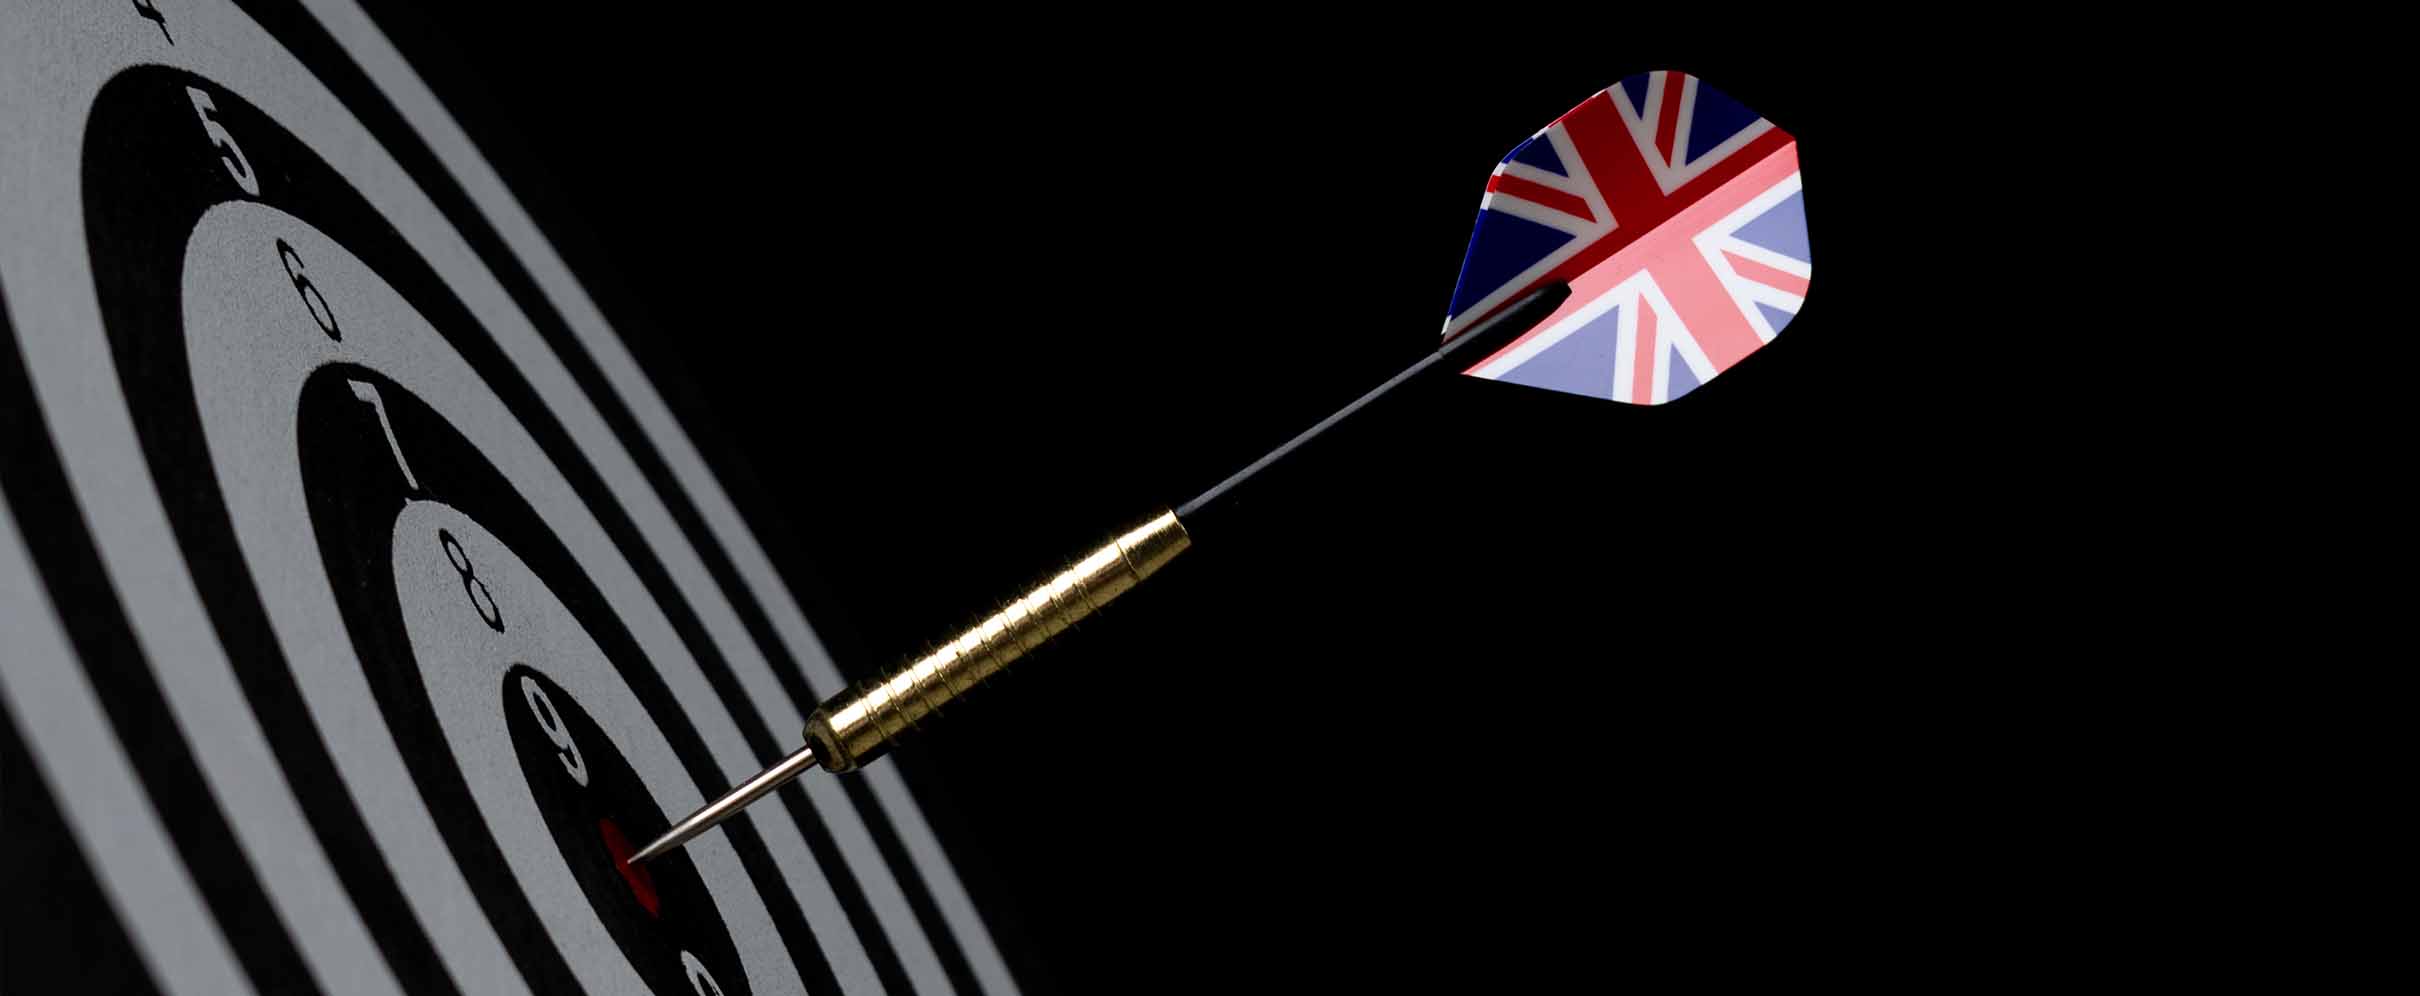  A dart with the British flag on its tail.